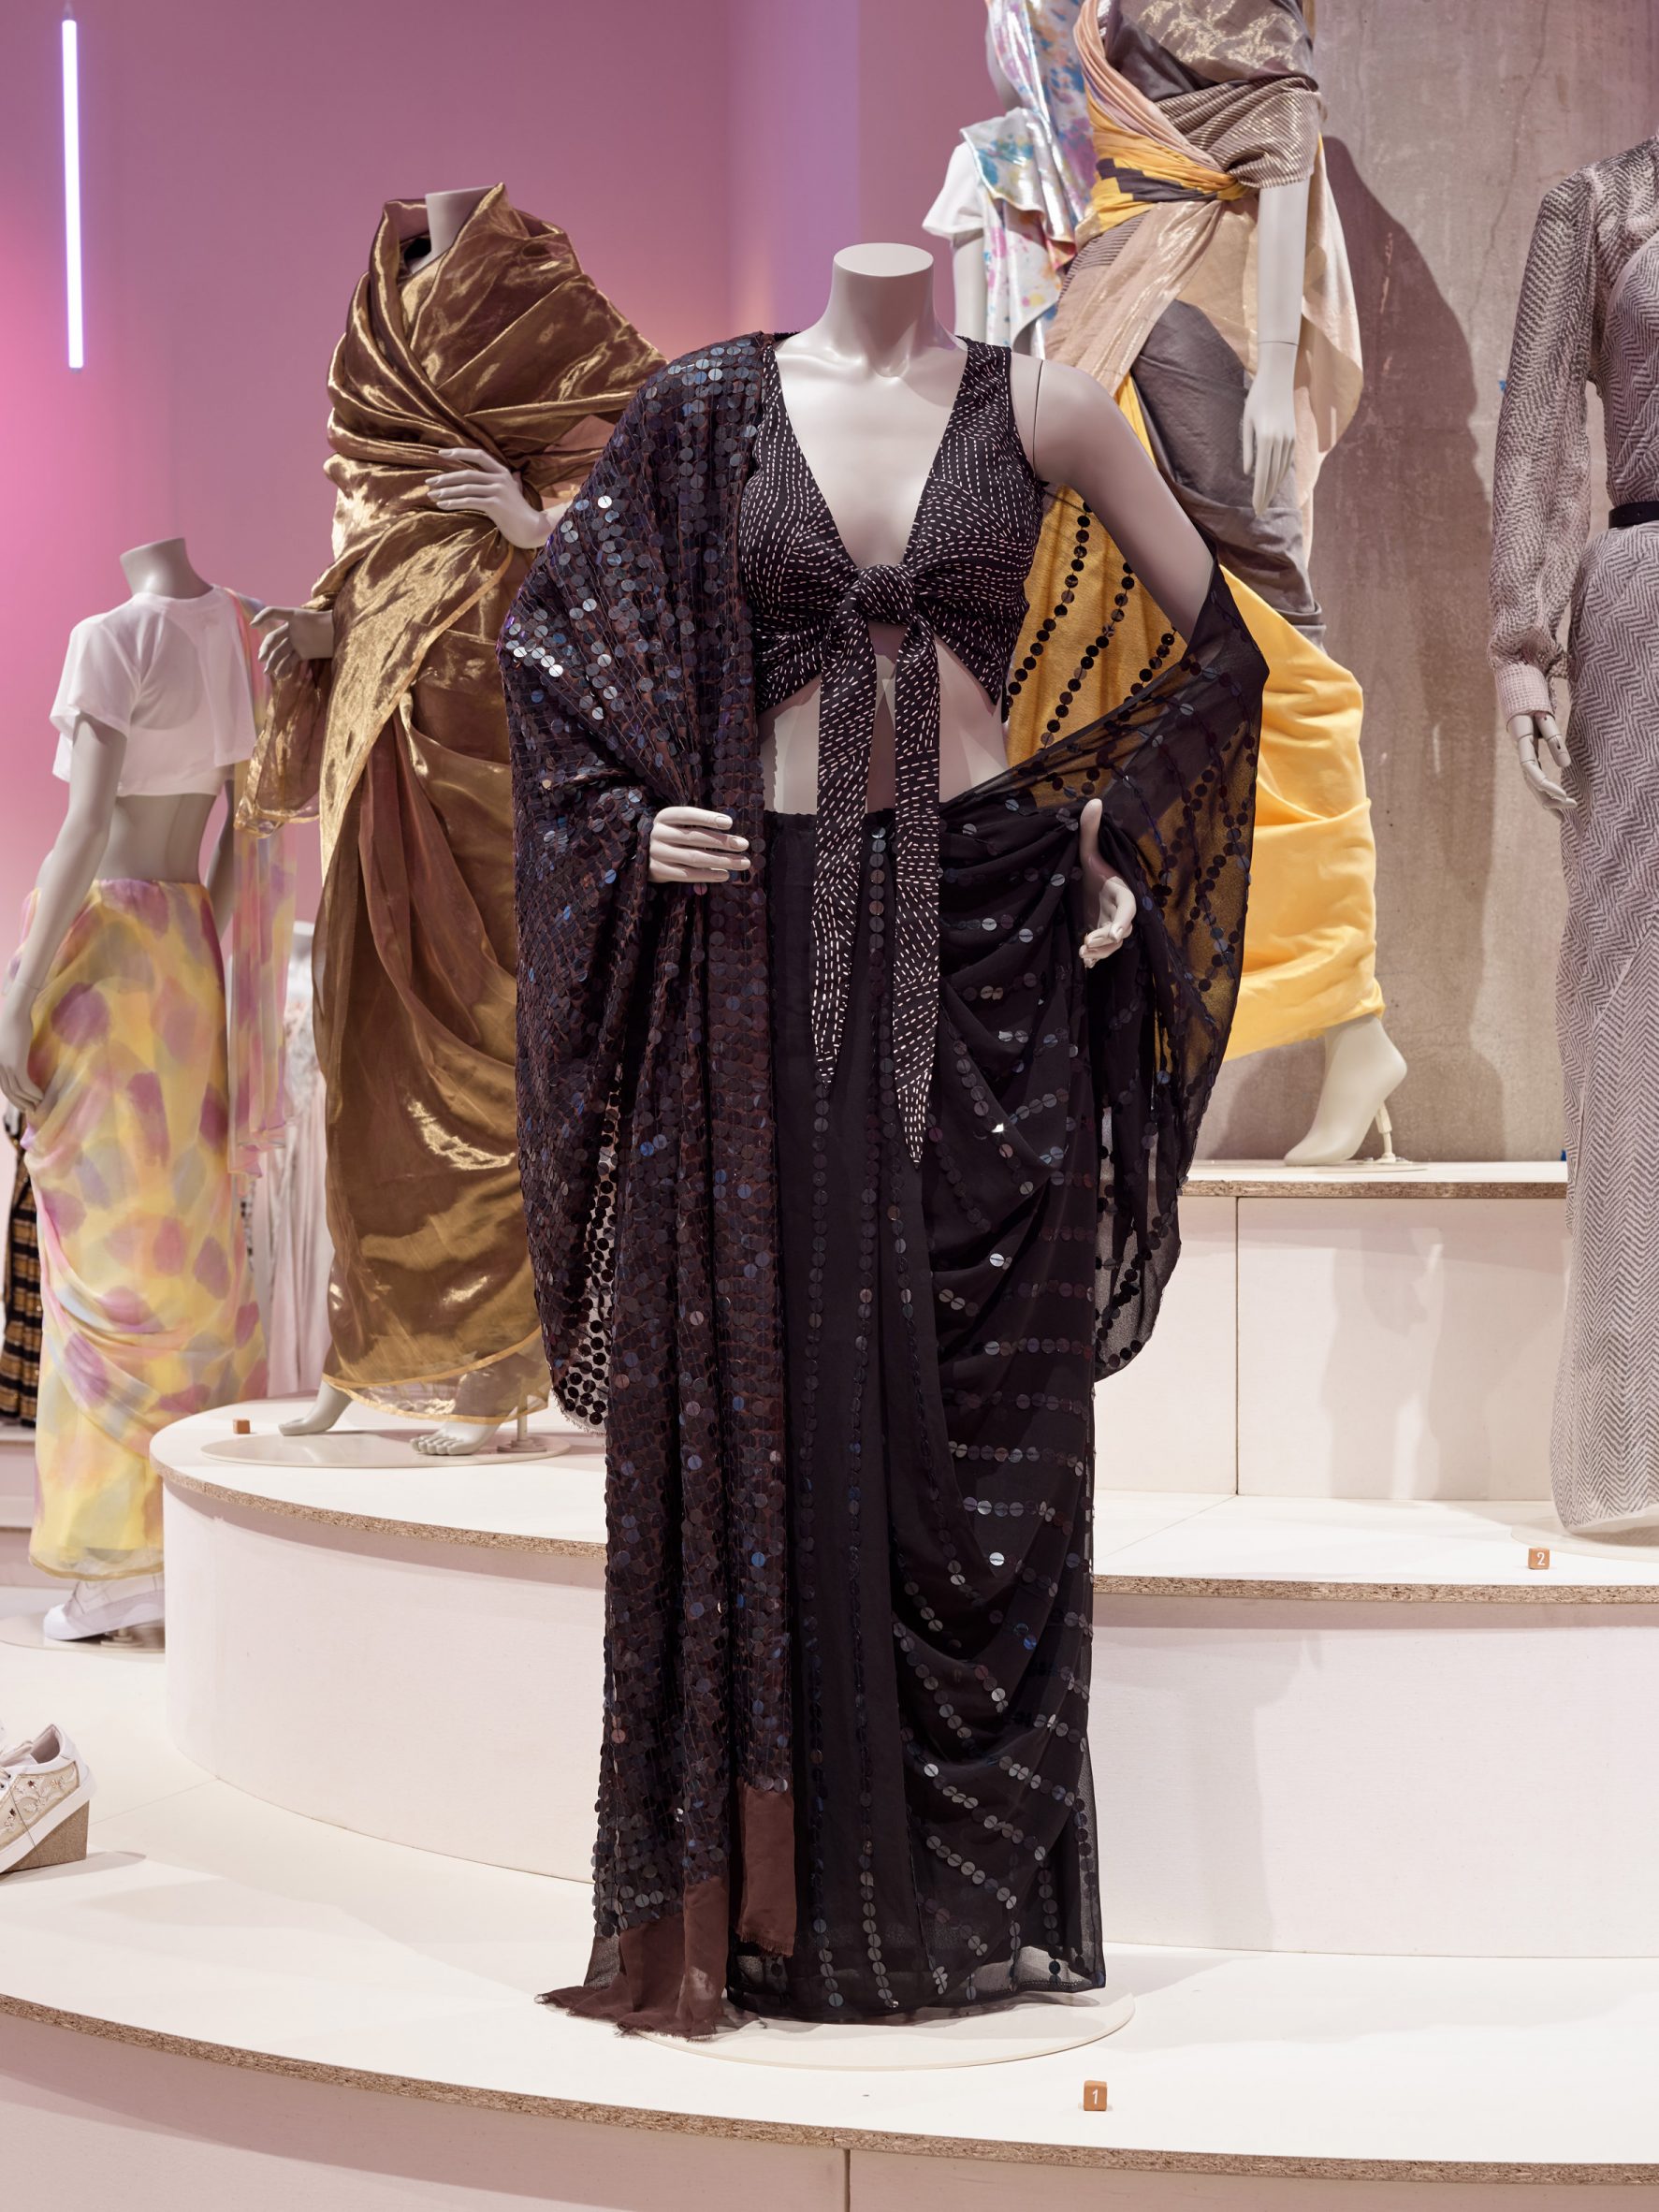 A sari embellished with sequins made from recycled X-ray film